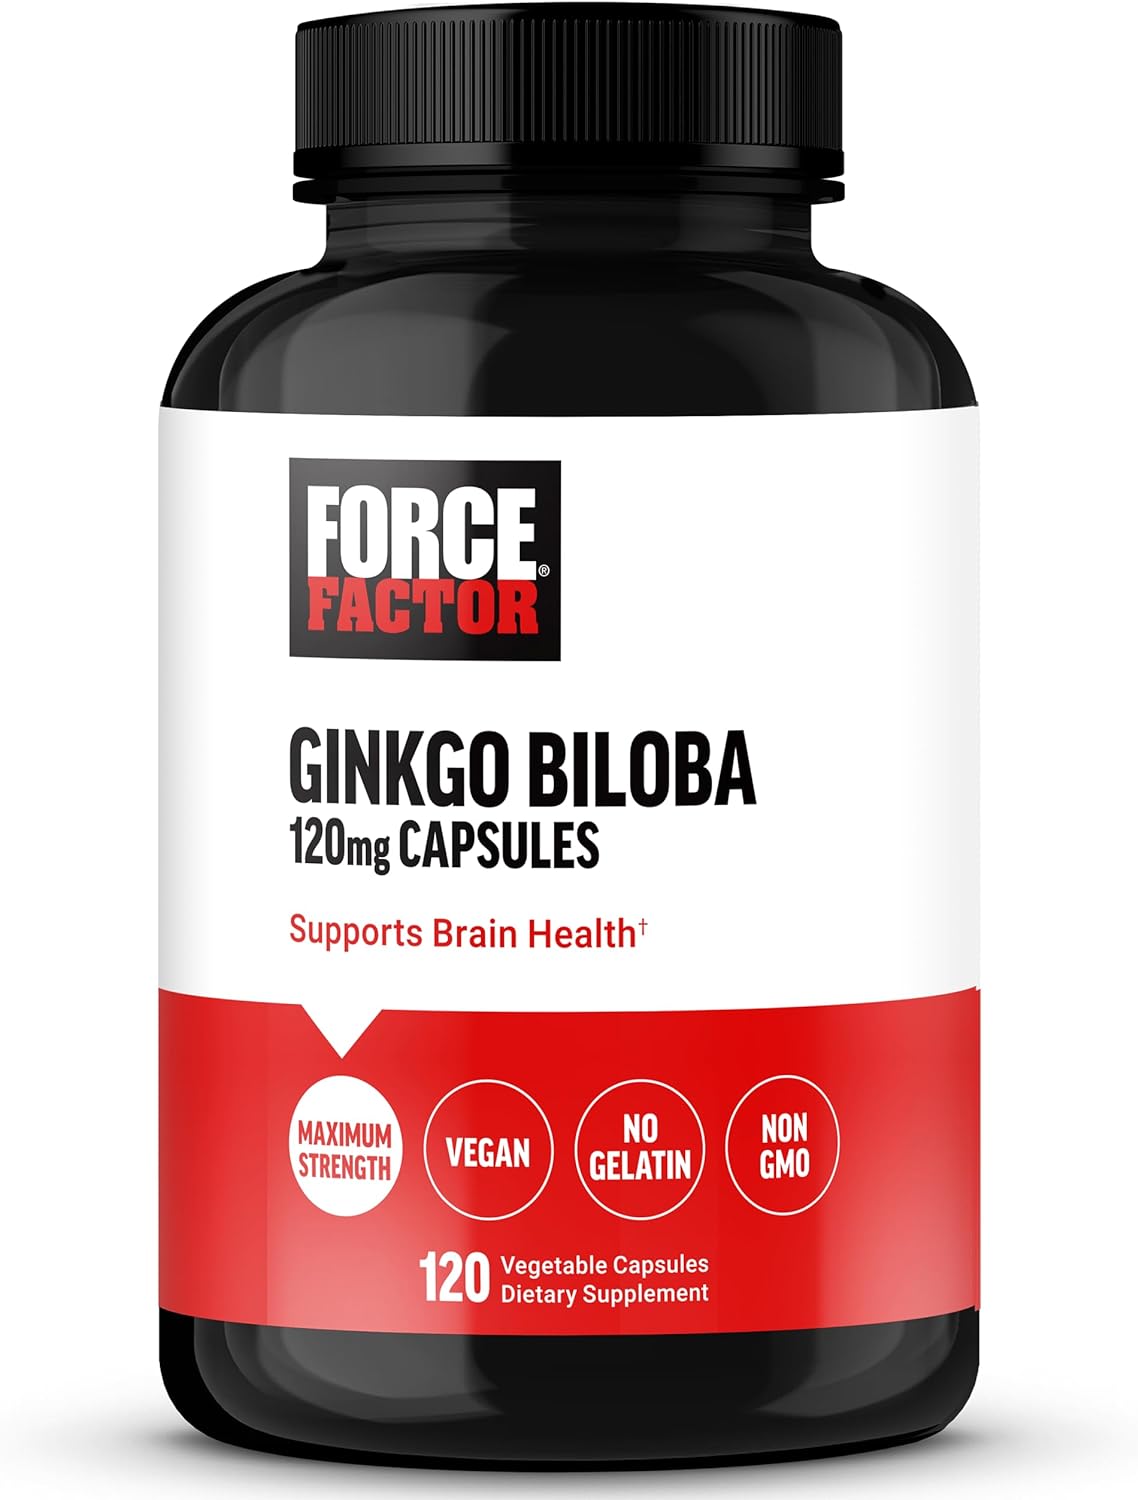 FORCE FACTOR Ginkgo Biloba 120mg, Brain Health Supplement for Adults, Maximum Strength Ginko Brain Support and Cognitive Supplement, Vegan, Non-GMO, 120 Capsules